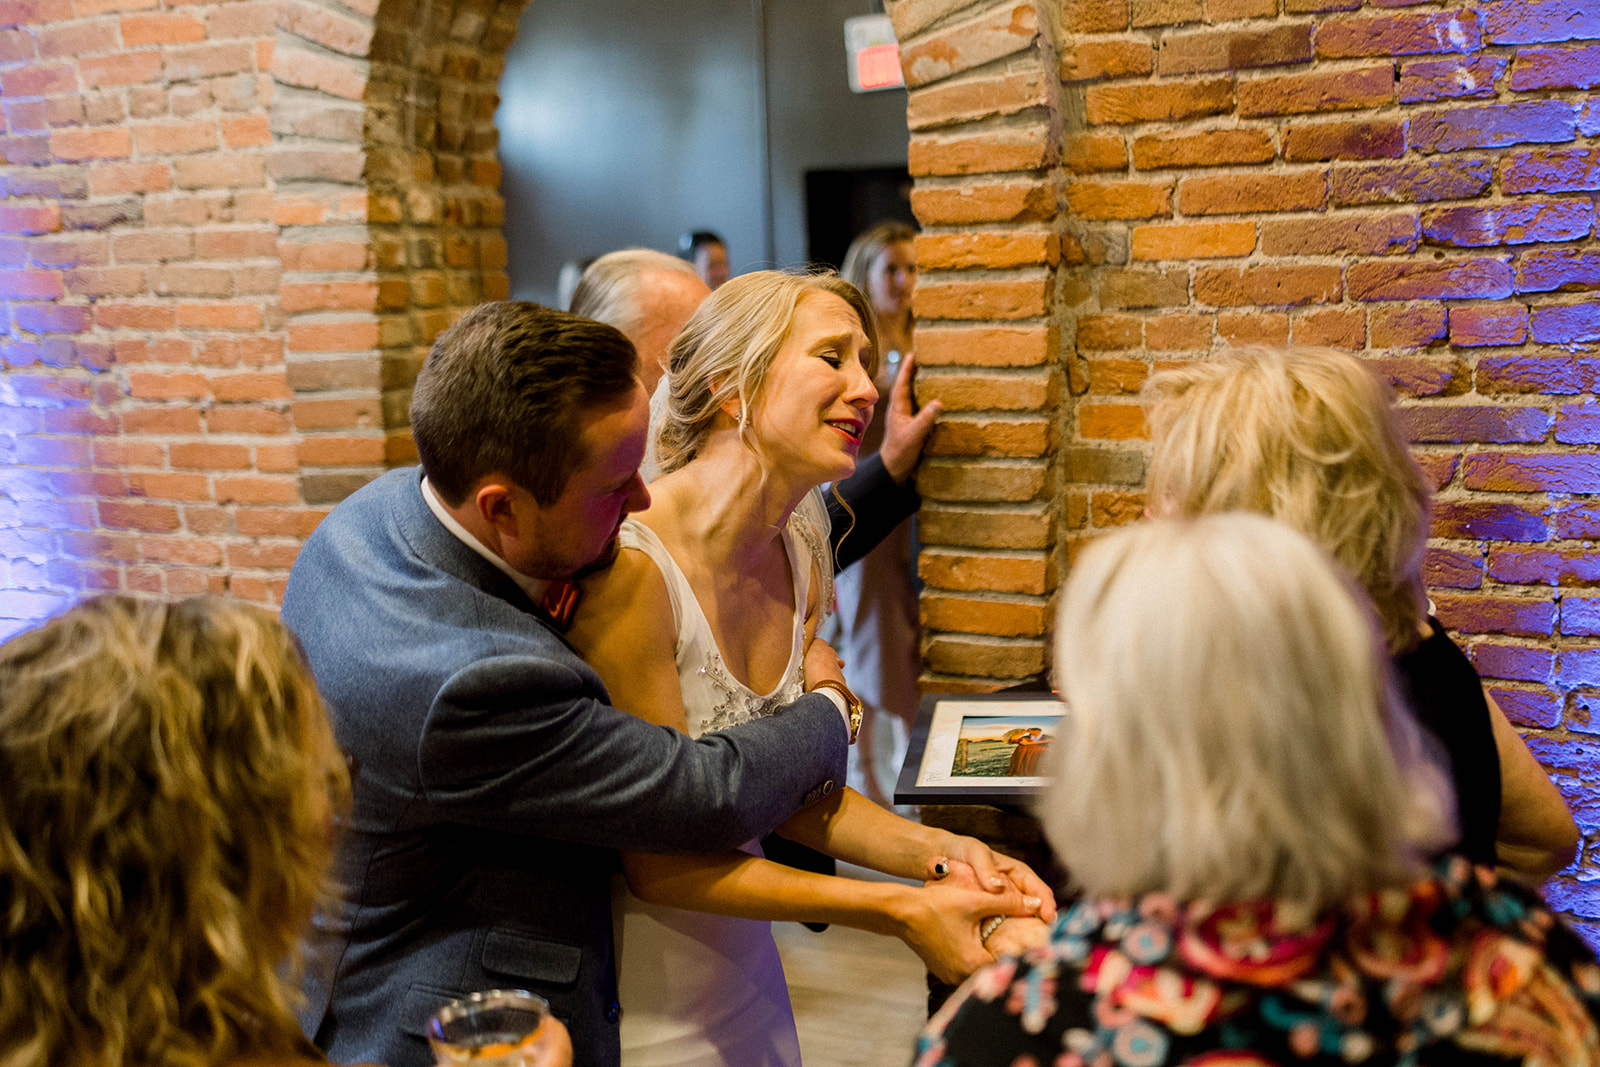 Intimate Wedding at The Forge in Downtown Columbus Indiana